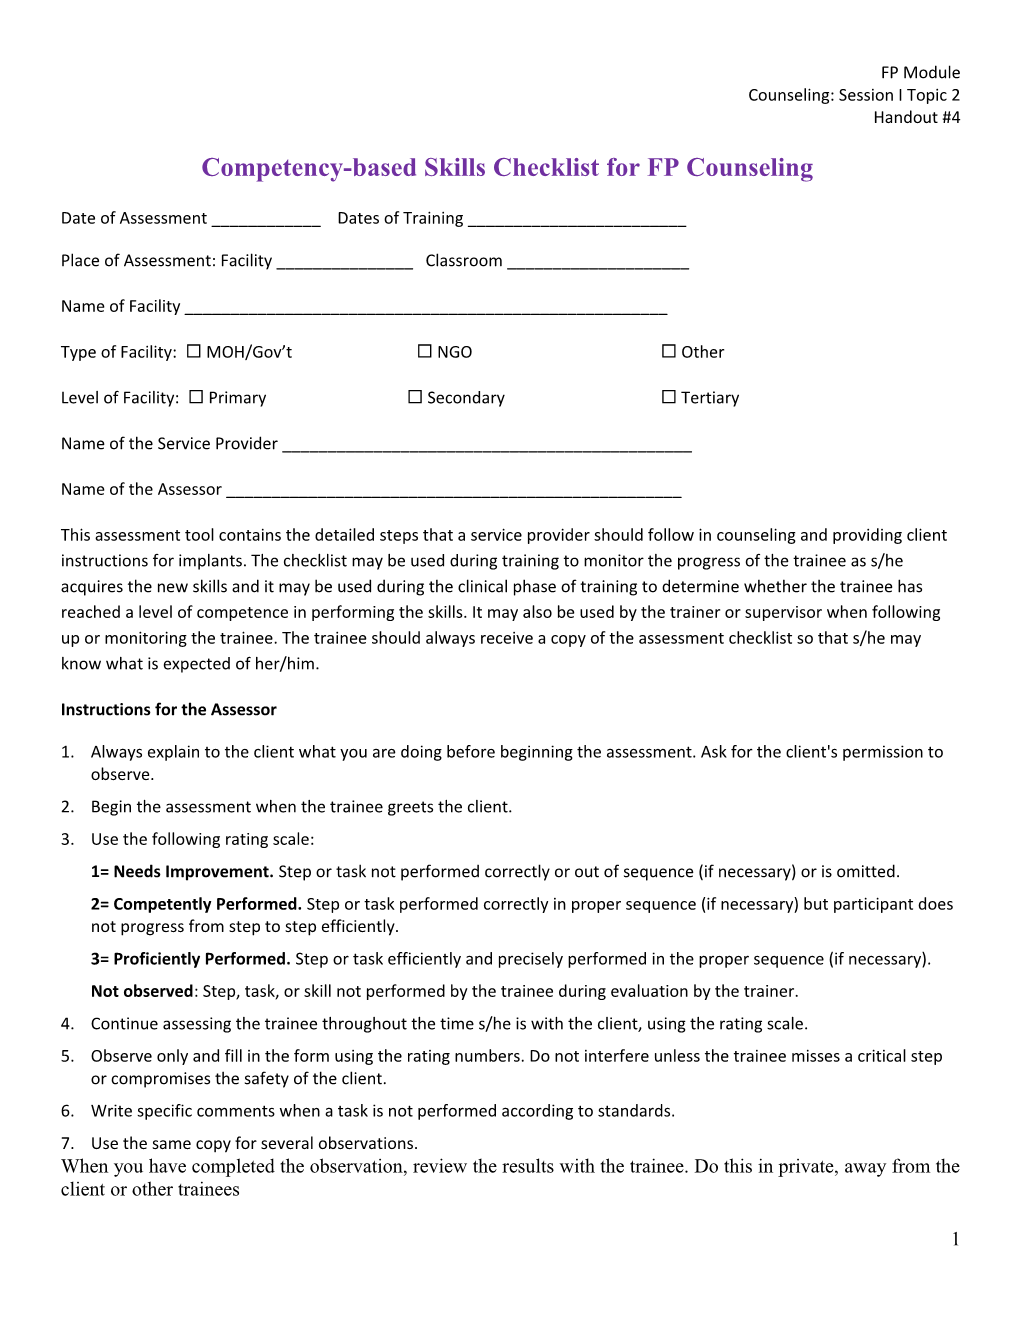 Competency-Based Skills Checklist for FP Counseling